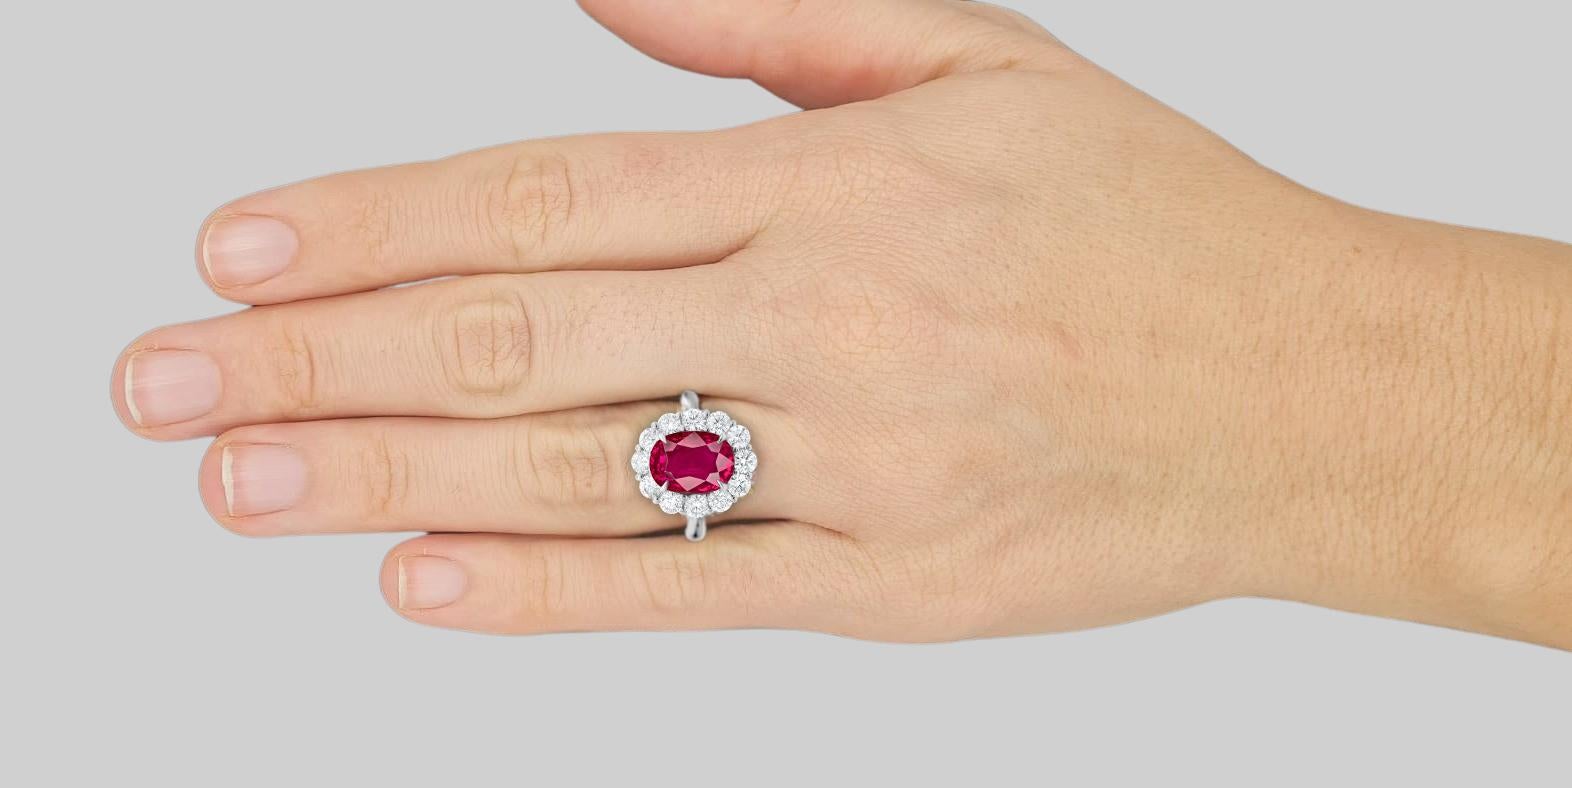 An exquisite natural untreated and unheated burmese ruby with a certification that states the origin.

The side diamonds sum 1 carat of round brilliant cut diamonds and the ring has been handmade in Italy by Antinori di Sanpietro
Carat Weight 	4.57